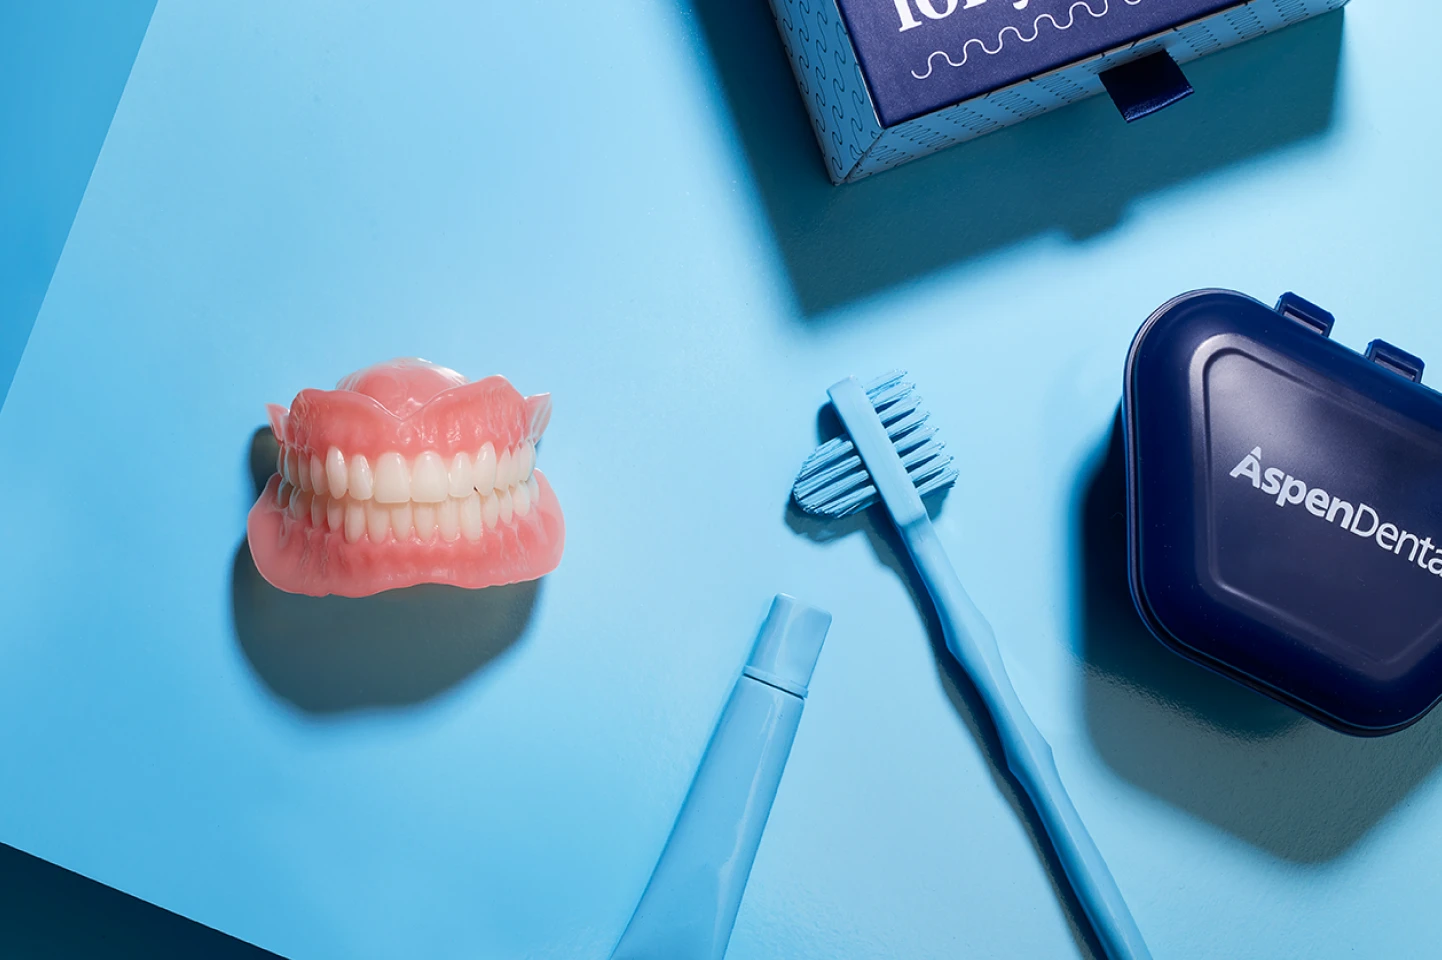 A denture model, denture storage case, toothbrush and toothpaste laid on a blue table representing a package included for new denture-wearer for Flexilytes℠ partial dentures.